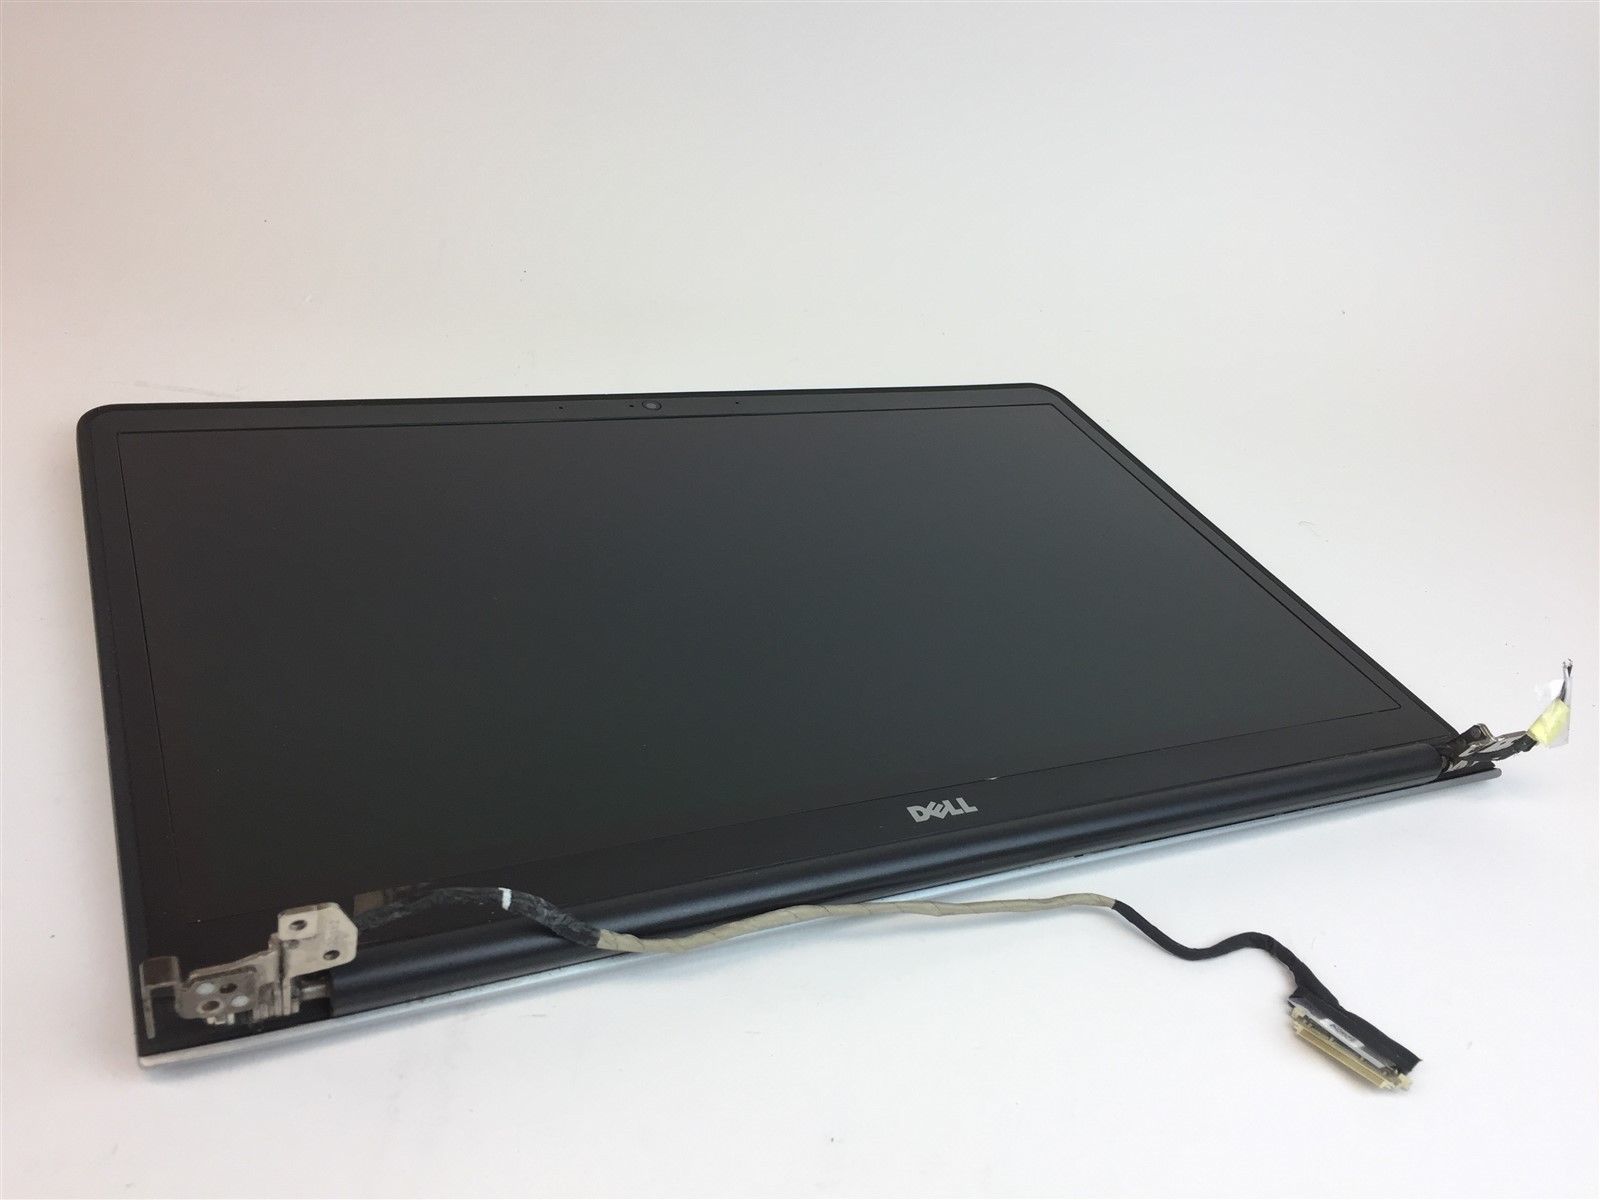 Dell Inspiron 15 5547 15.6" LED LCD Replacement Panel 651CN XGNC3 with an Issue